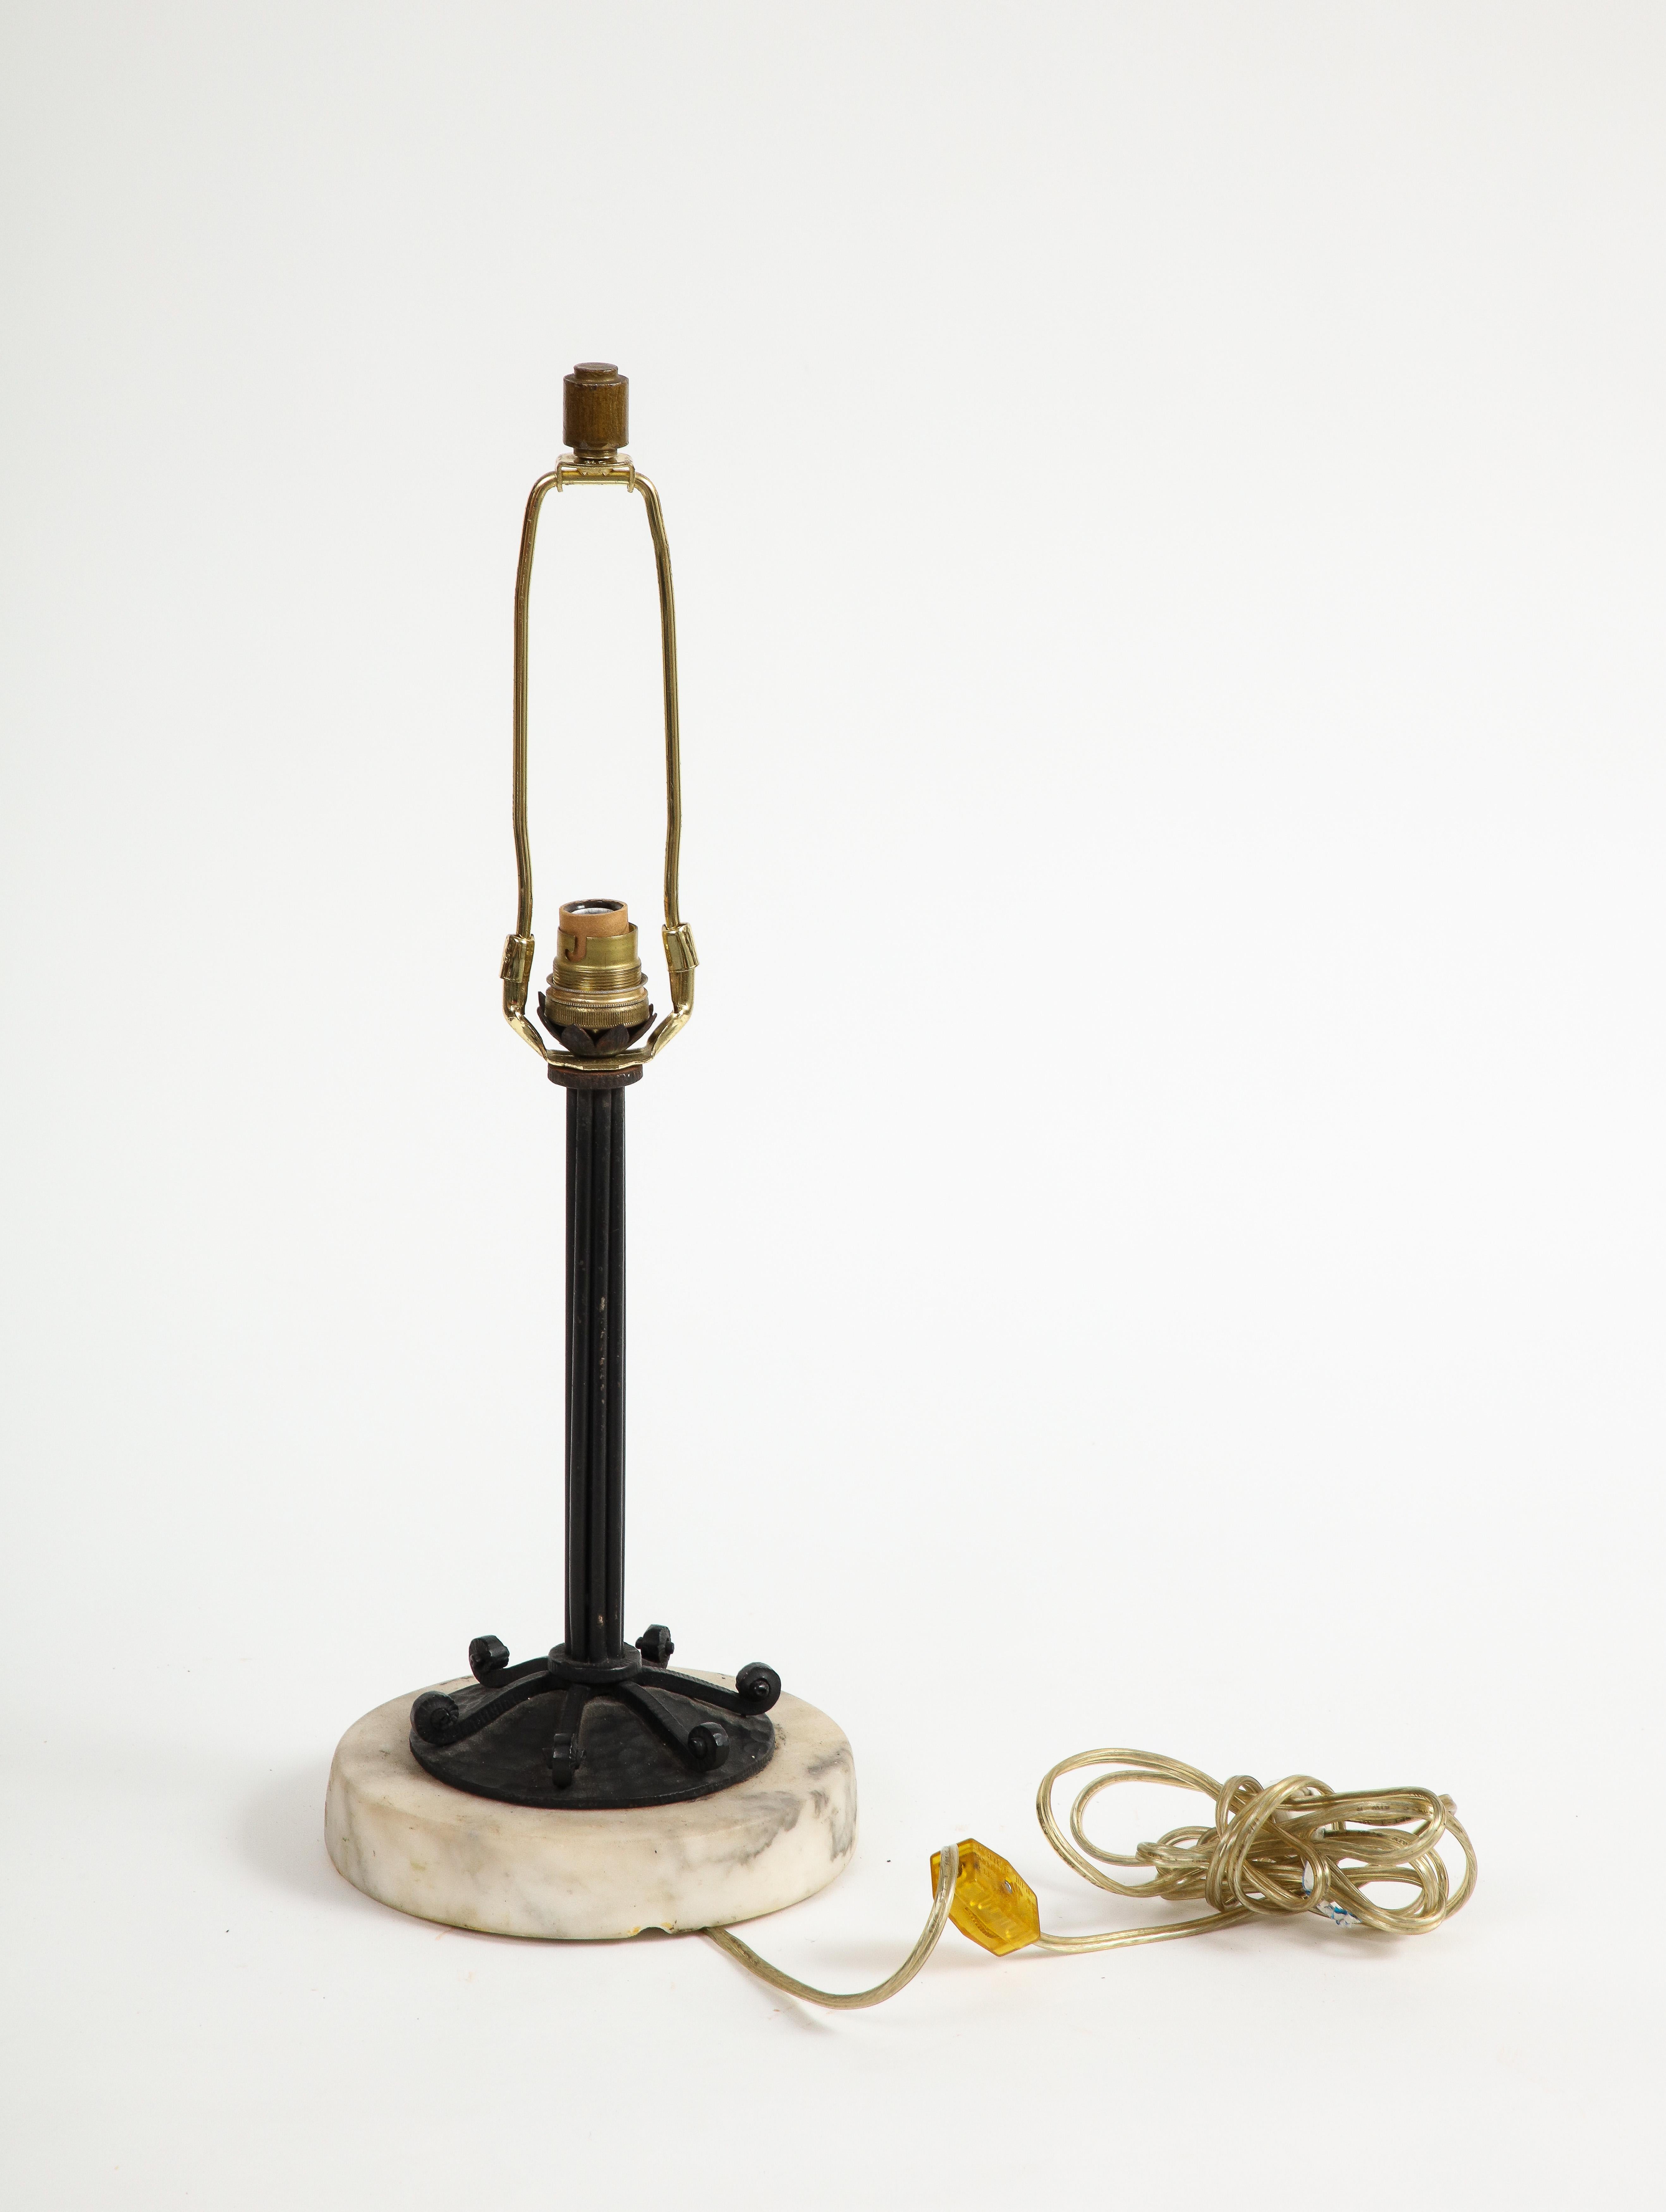 20th Century French wrought iron table lamp on marble base, featuring leaf decoration at the base of the socket and coiled wrought iron lines on the lamp base.